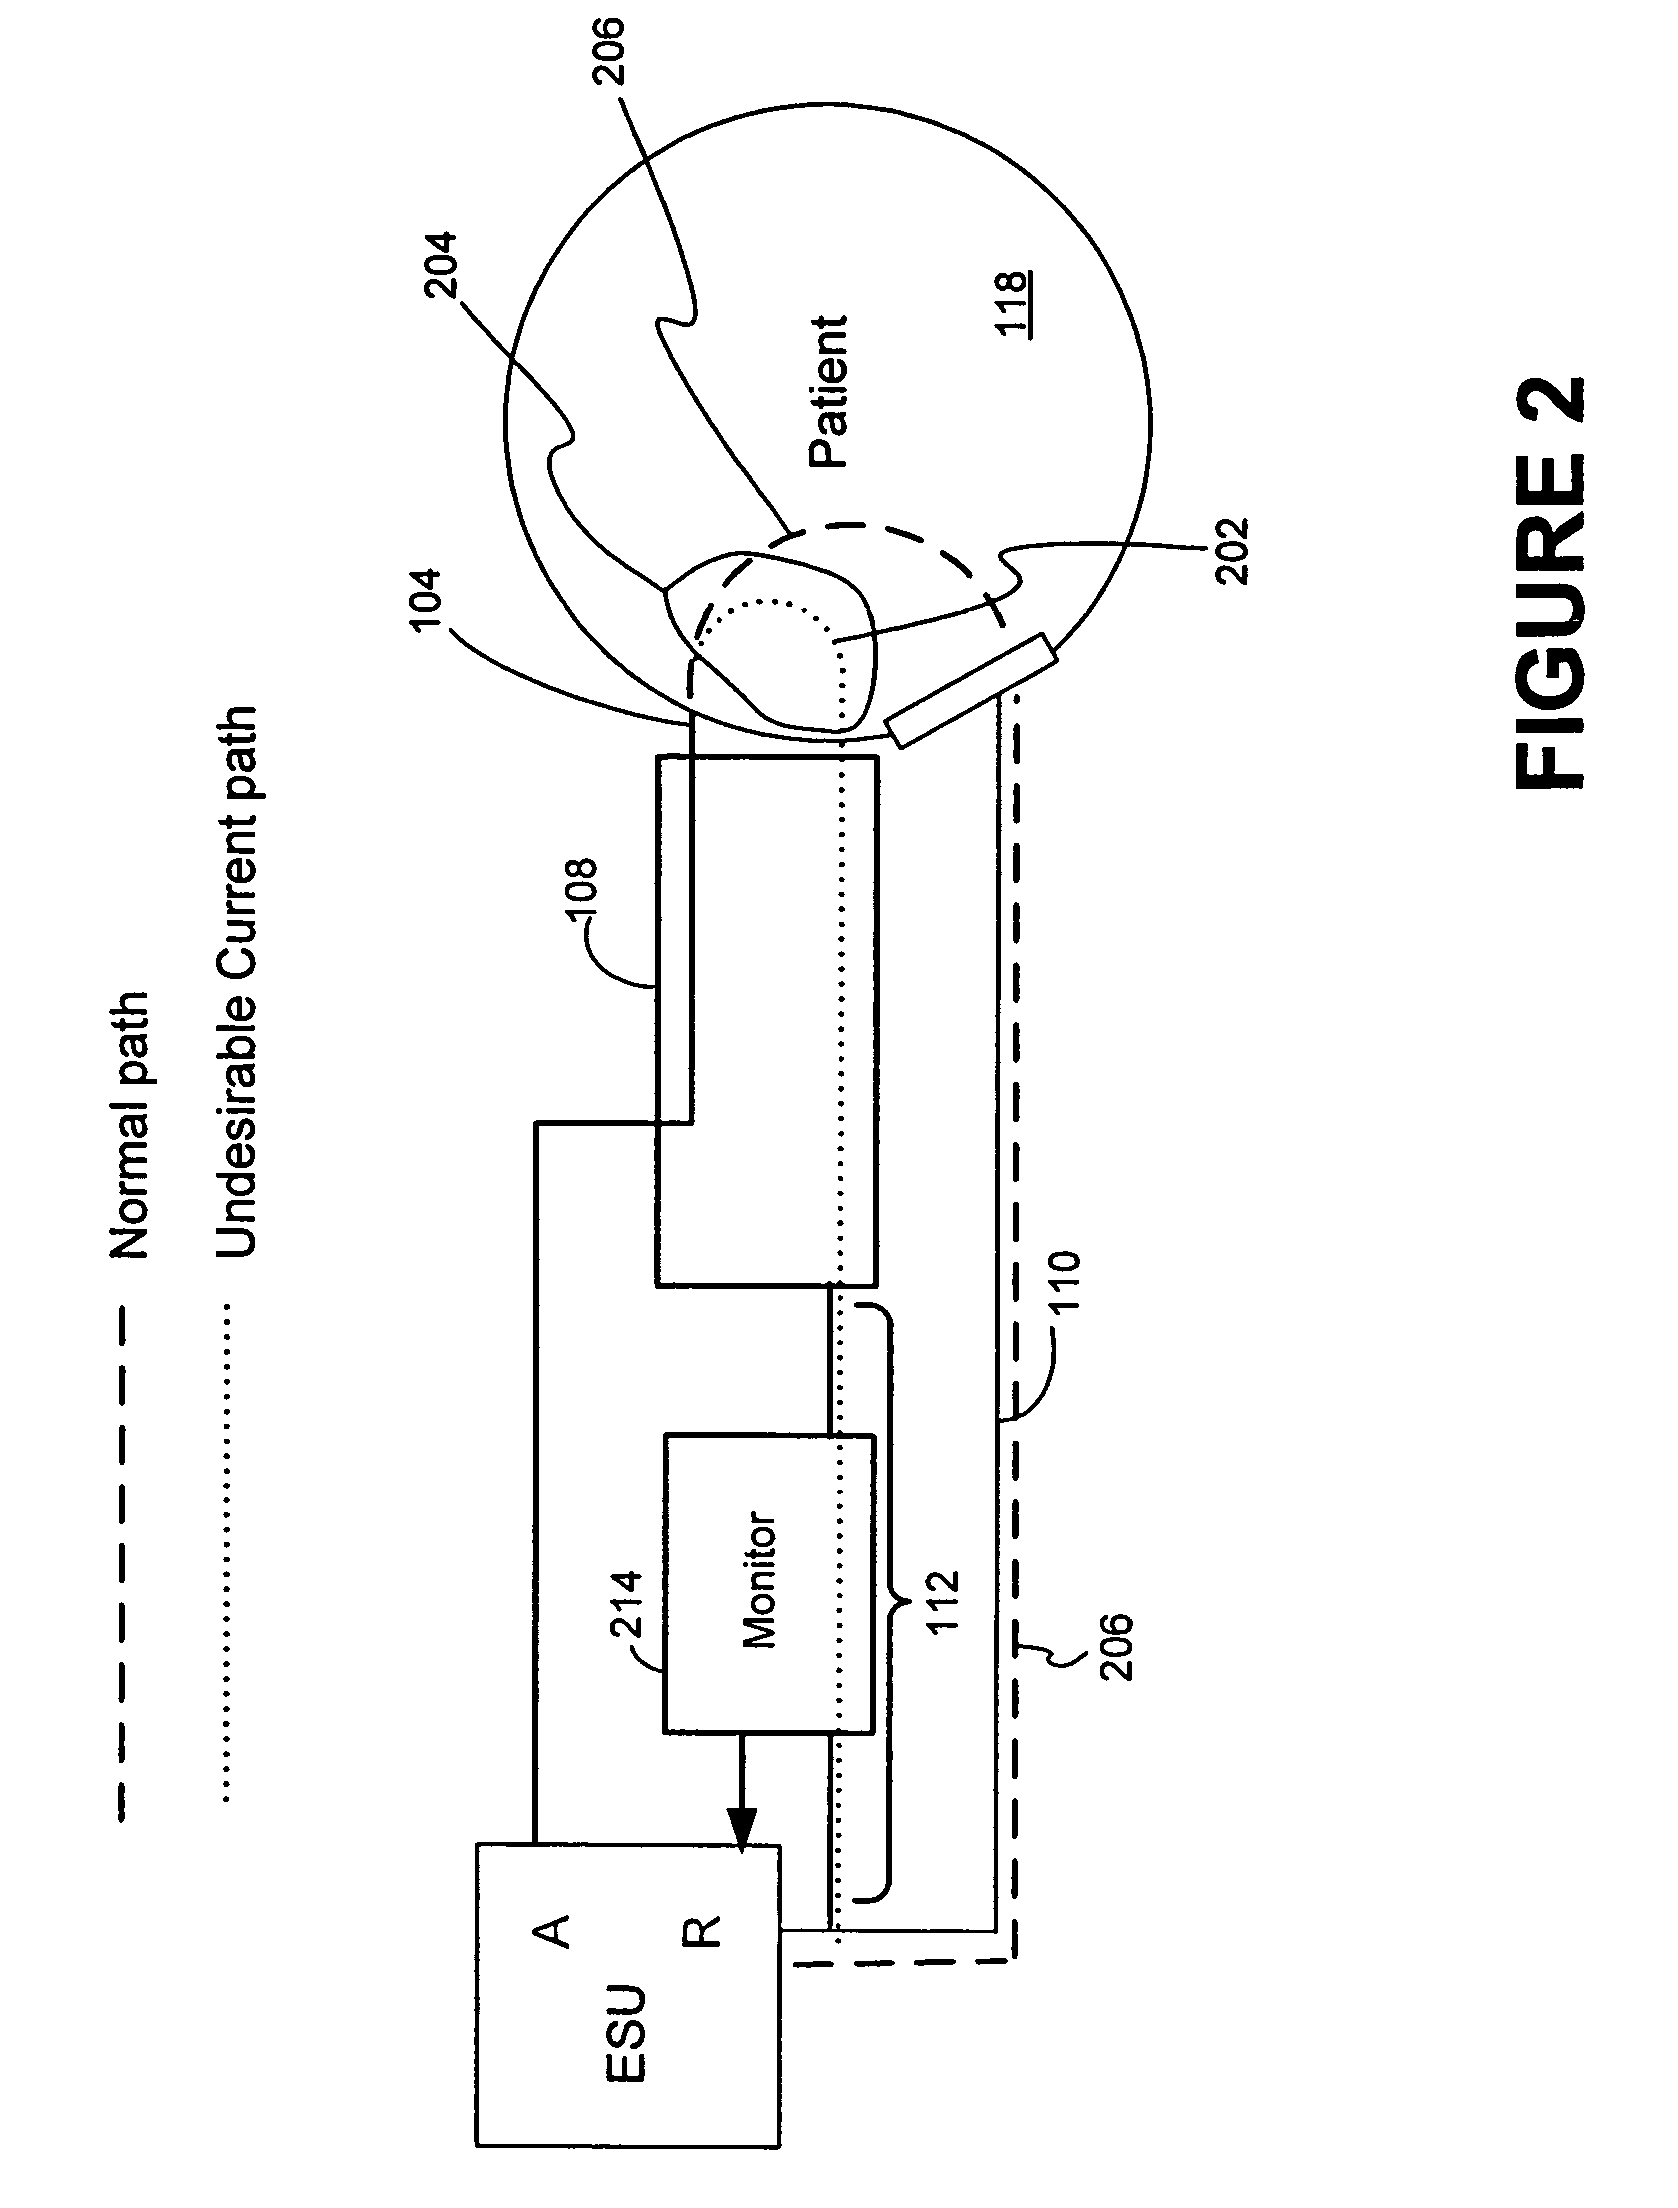 System and method for performing an electrosurgical procedure